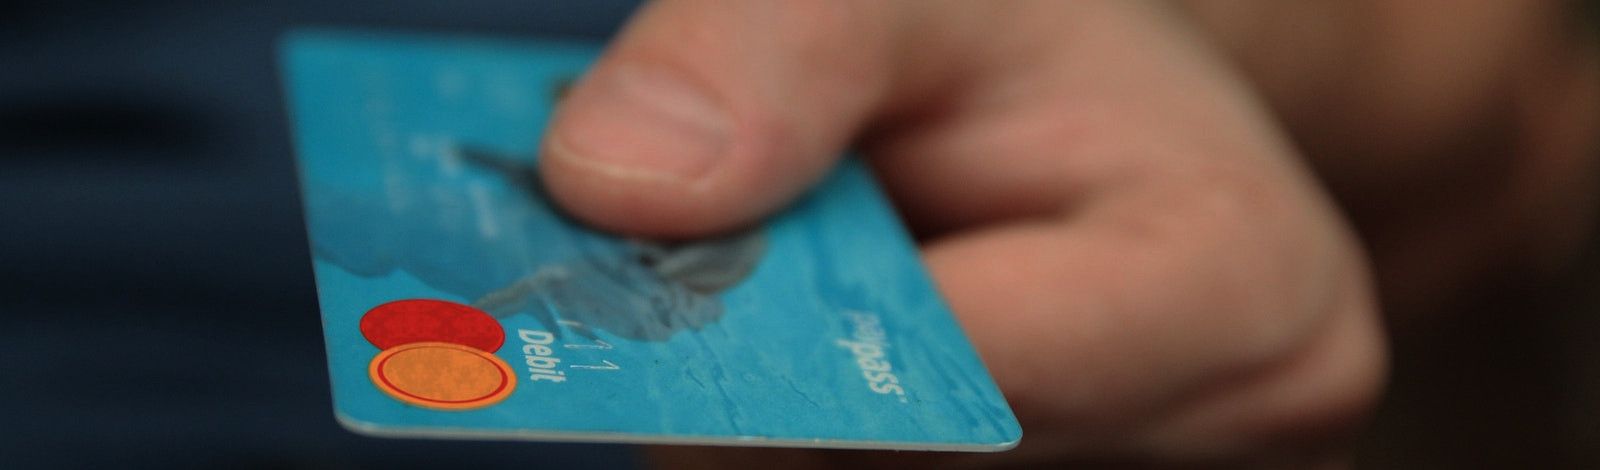 Reinvestment Partners believes that if properly regulated, prepaid cards can help previously unbanked or underbanked households to access the formal payments system.